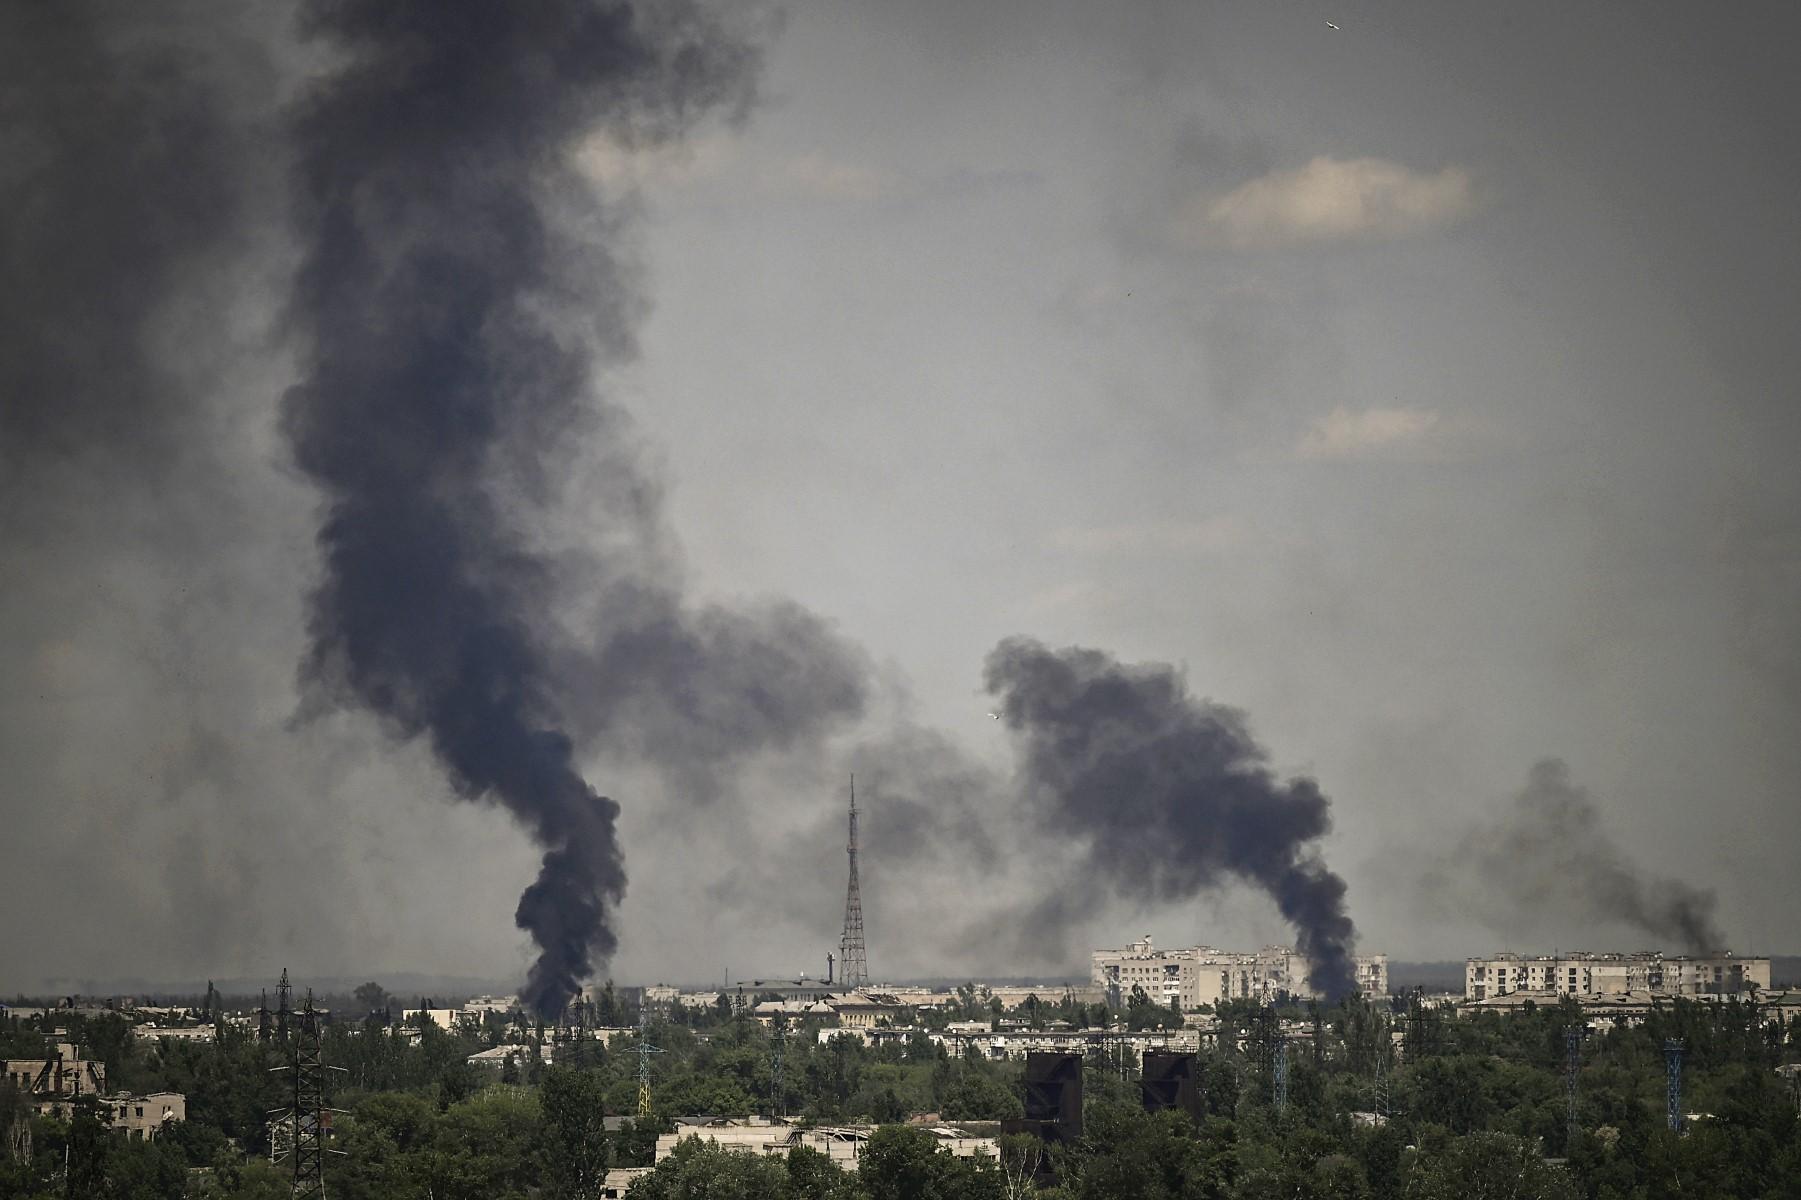 Smoke rises in the city of Severodonetsk during heavy fighting between Ukrainian and Russian troops in the eastern Ukrainian region of Donbas on May 30. Photo: AFP